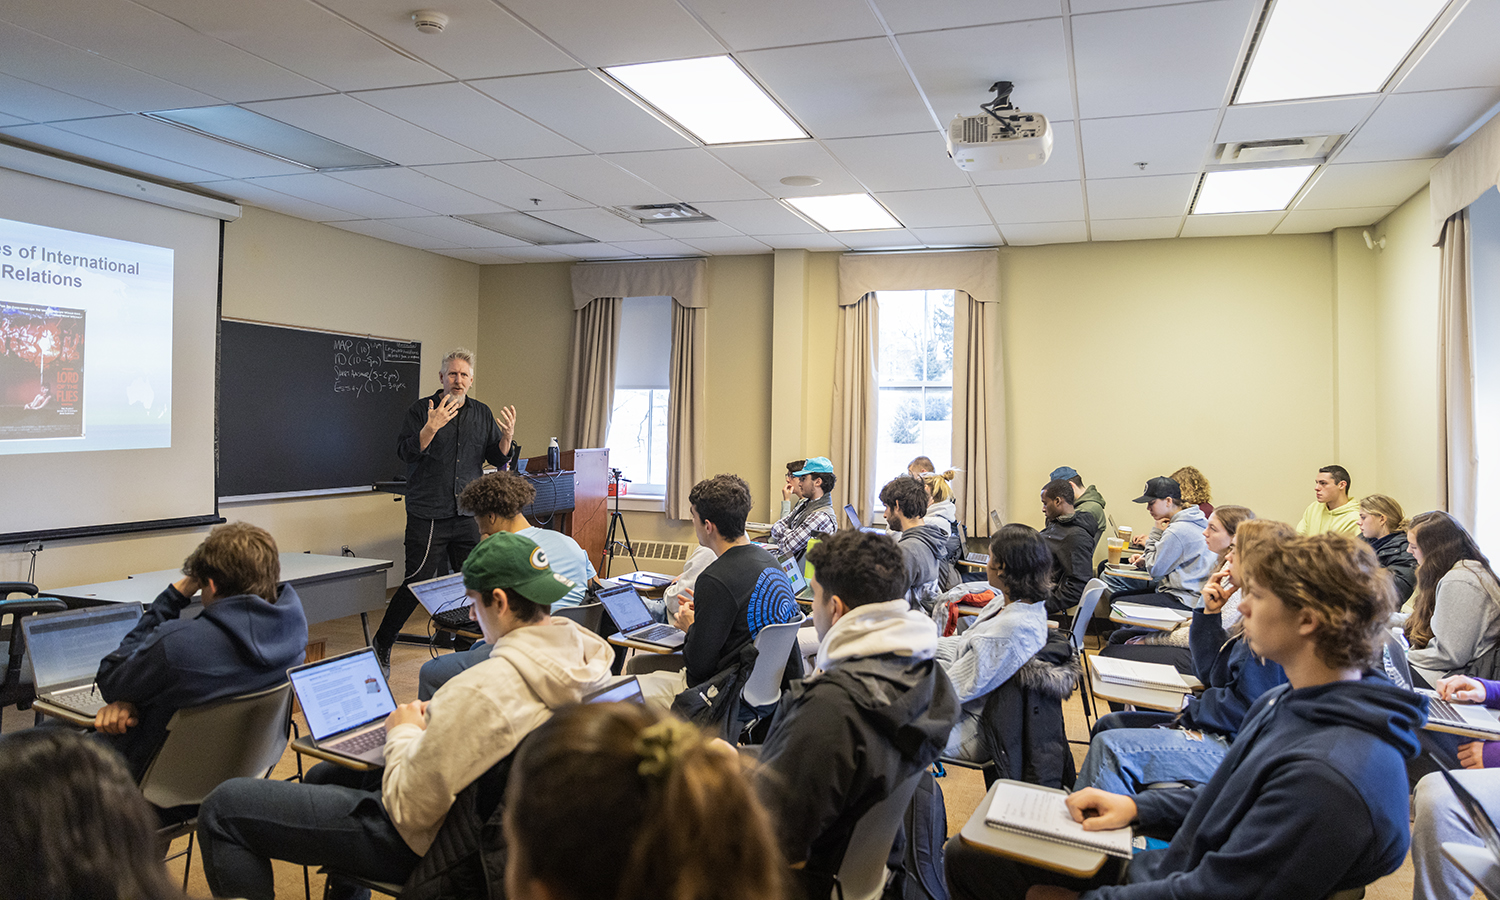 Professor Kevin Dunn teaches “Introduction to International Relations” in Stern Hall on Thursday morning.